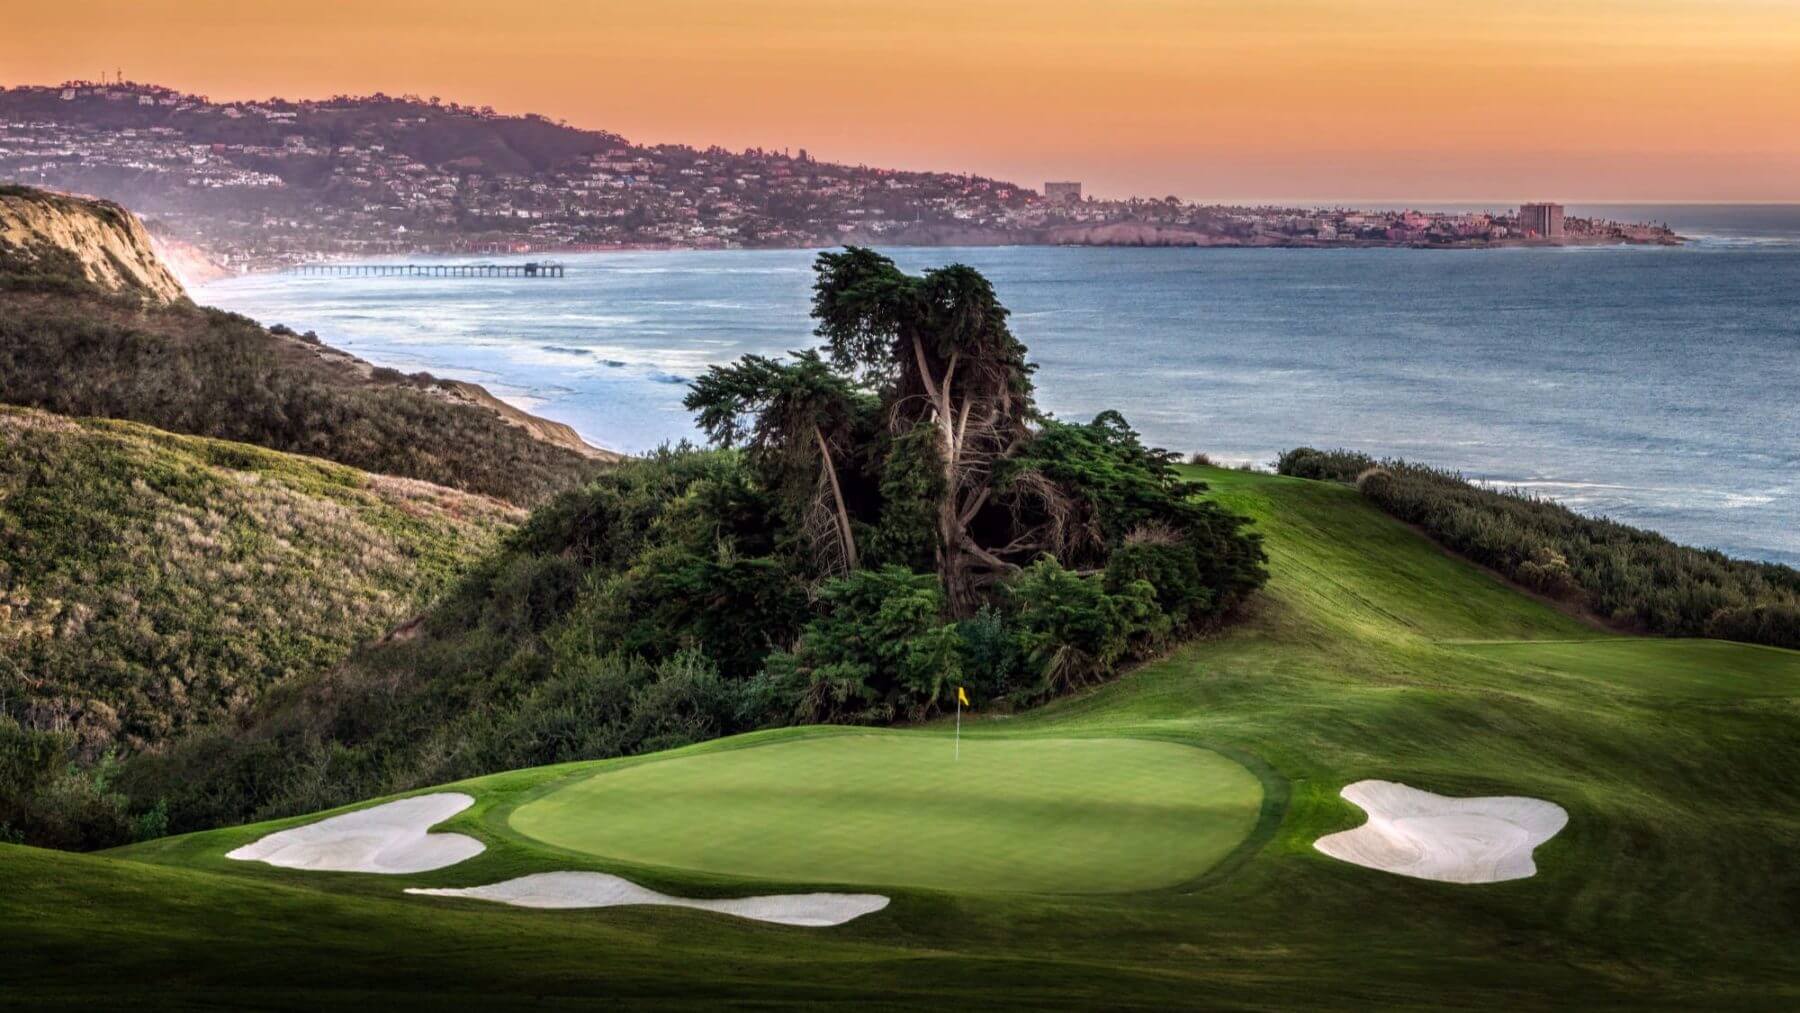 Torrey Pines fifteenth green with San Diego city views